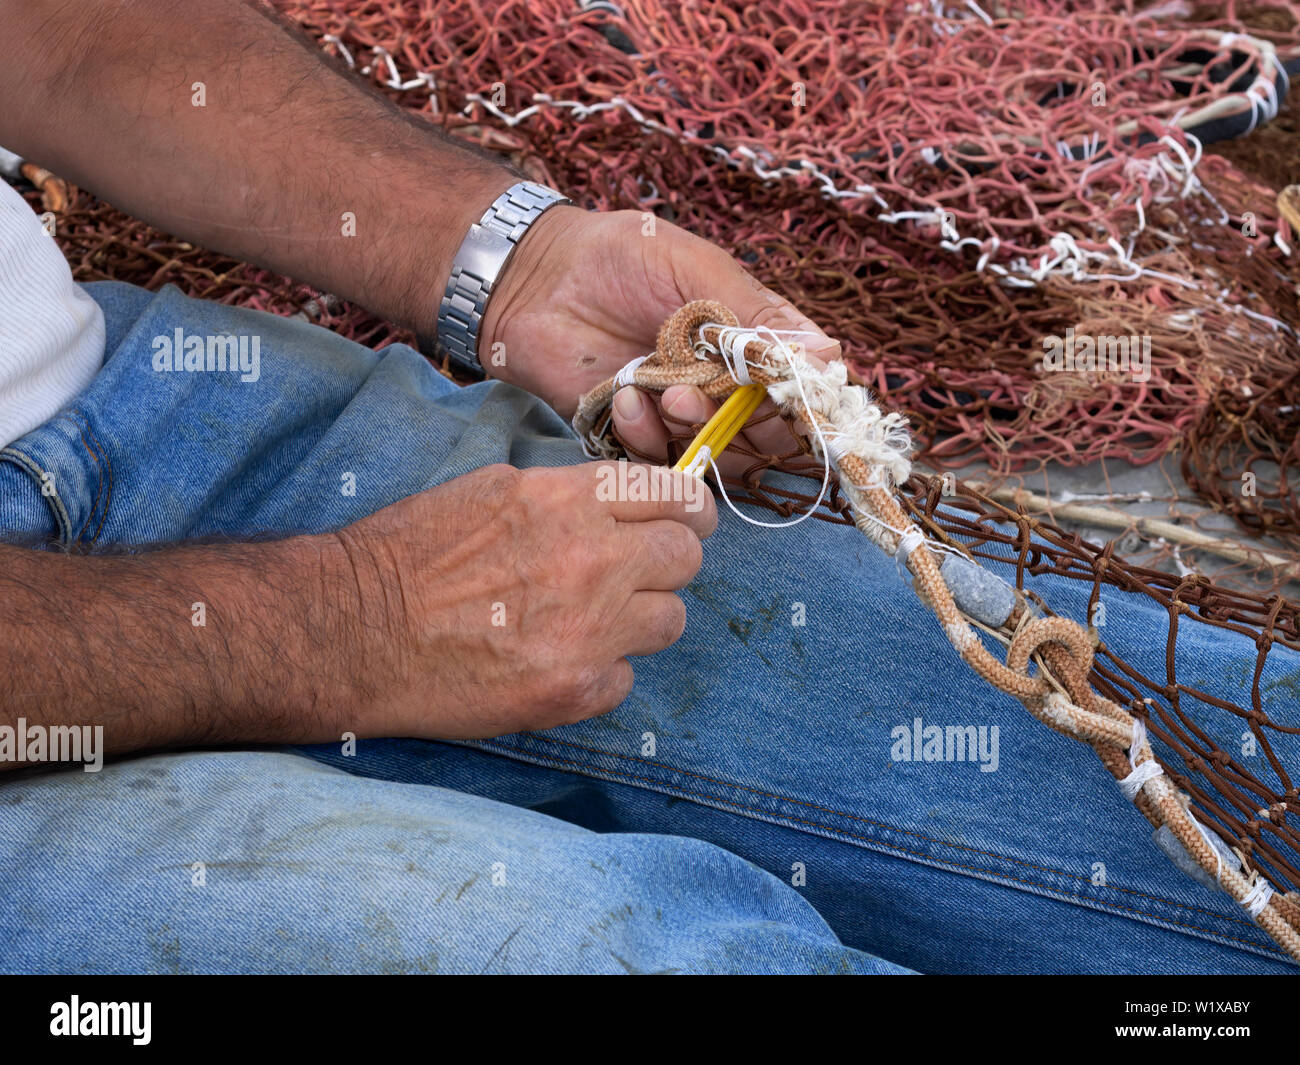 150+ Knotted Fishing Nets To Sewing Stock Photos, Pictures & Royalty-Free  Images - iStock, fishing net knot